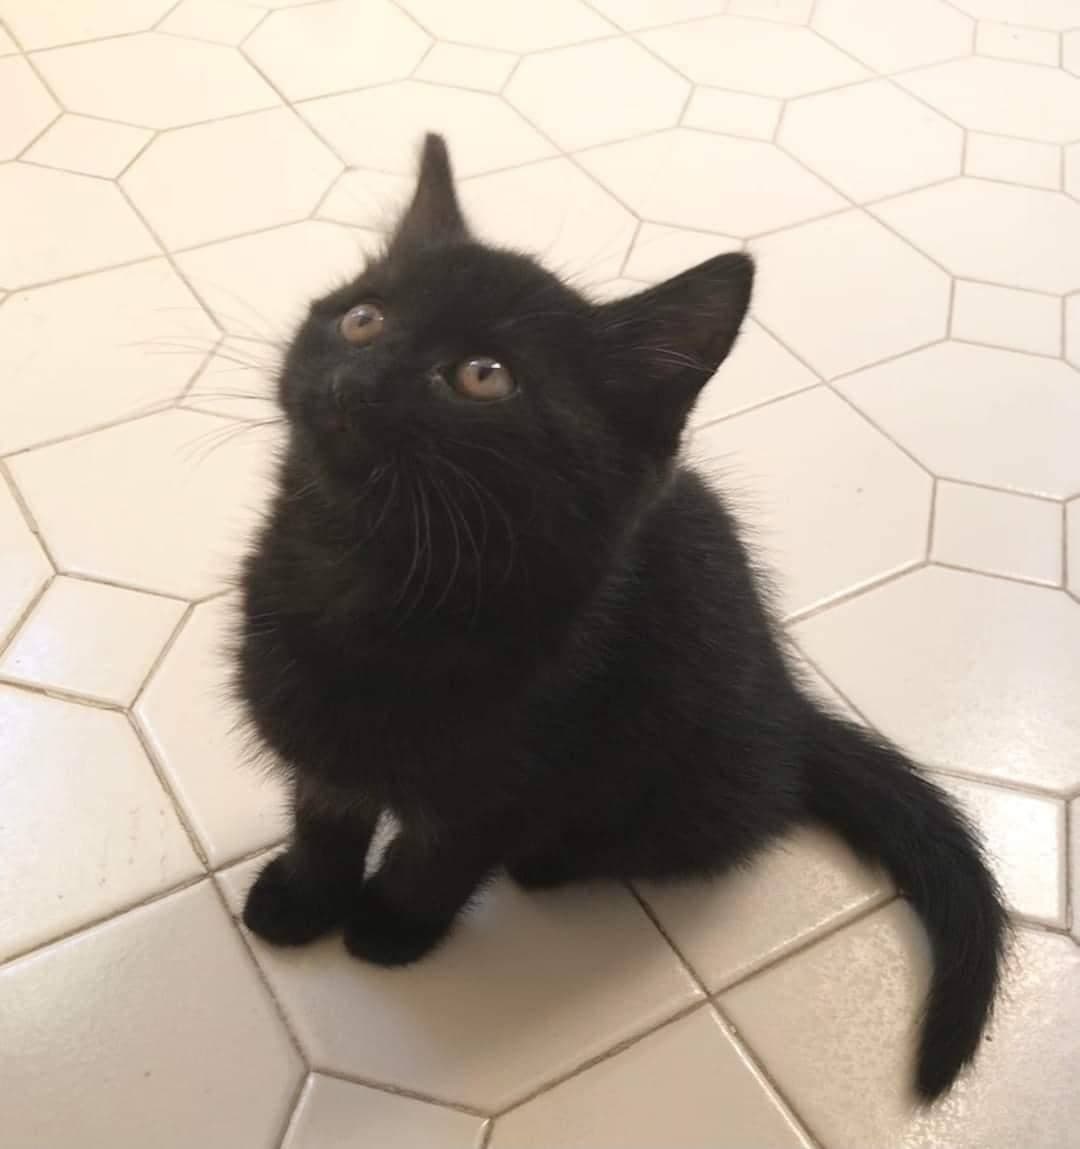 Adopt Charlotte! This cutie was found as a stray in Morris Plains. She is very friendly, playful, and snuggly. 😻 She is around 8wks old and ready for her new home! 🐈‍⬛

<a target='_blank' href='https://www.instagram.com/explore/tags/kittensofig/'>#kittensofig</a> <a target='_blank' href='https://www.instagram.com/explore/tags/kitten/'>#kitten</a> <a target='_blank' href='https://www.instagram.com/explore/tags/kittensofinstagram/'>#kittensofinstagram</a> <a target='_blank' href='https://www.instagram.com/explore/tags/blackcat/'>#blackcat</a> <a target='_blank' href='https://www.instagram.com/explore/tags/blackcatsofinstagram/'>#blackcatsofinstagram</a> <a target='_blank' href='https://www.instagram.com/explore/tags/blackkittens/'>#blackkittens</a> <a target='_blank' href='https://www.instagram.com/explore/tags/morristownnj/'>#morristownnj</a> <a target='_blank' href='https://www.instagram.com/explore/tags/nj/'>#nj</a> <a target='_blank' href='https://www.instagram.com/explore/tags/newjersey/'>#newjersey</a> <a target='_blank' href='https://www.instagram.com/explore/tags/911dogandcatrescue/'>#911dogandcatrescue</a> <a target='_blank' href='https://www.instagram.com/explore/tags/adopt/'>#adopt</a> <a target='_blank' href='https://www.instagram.com/explore/tags/rescue/'>#rescue</a> <a target='_blank' href='https://www.instagram.com/explore/tags/morriscounty/'>#morriscounty</a> <a target='_blank' href='https://www.instagram.com/explore/tags/morristown/'>#morristown</a>